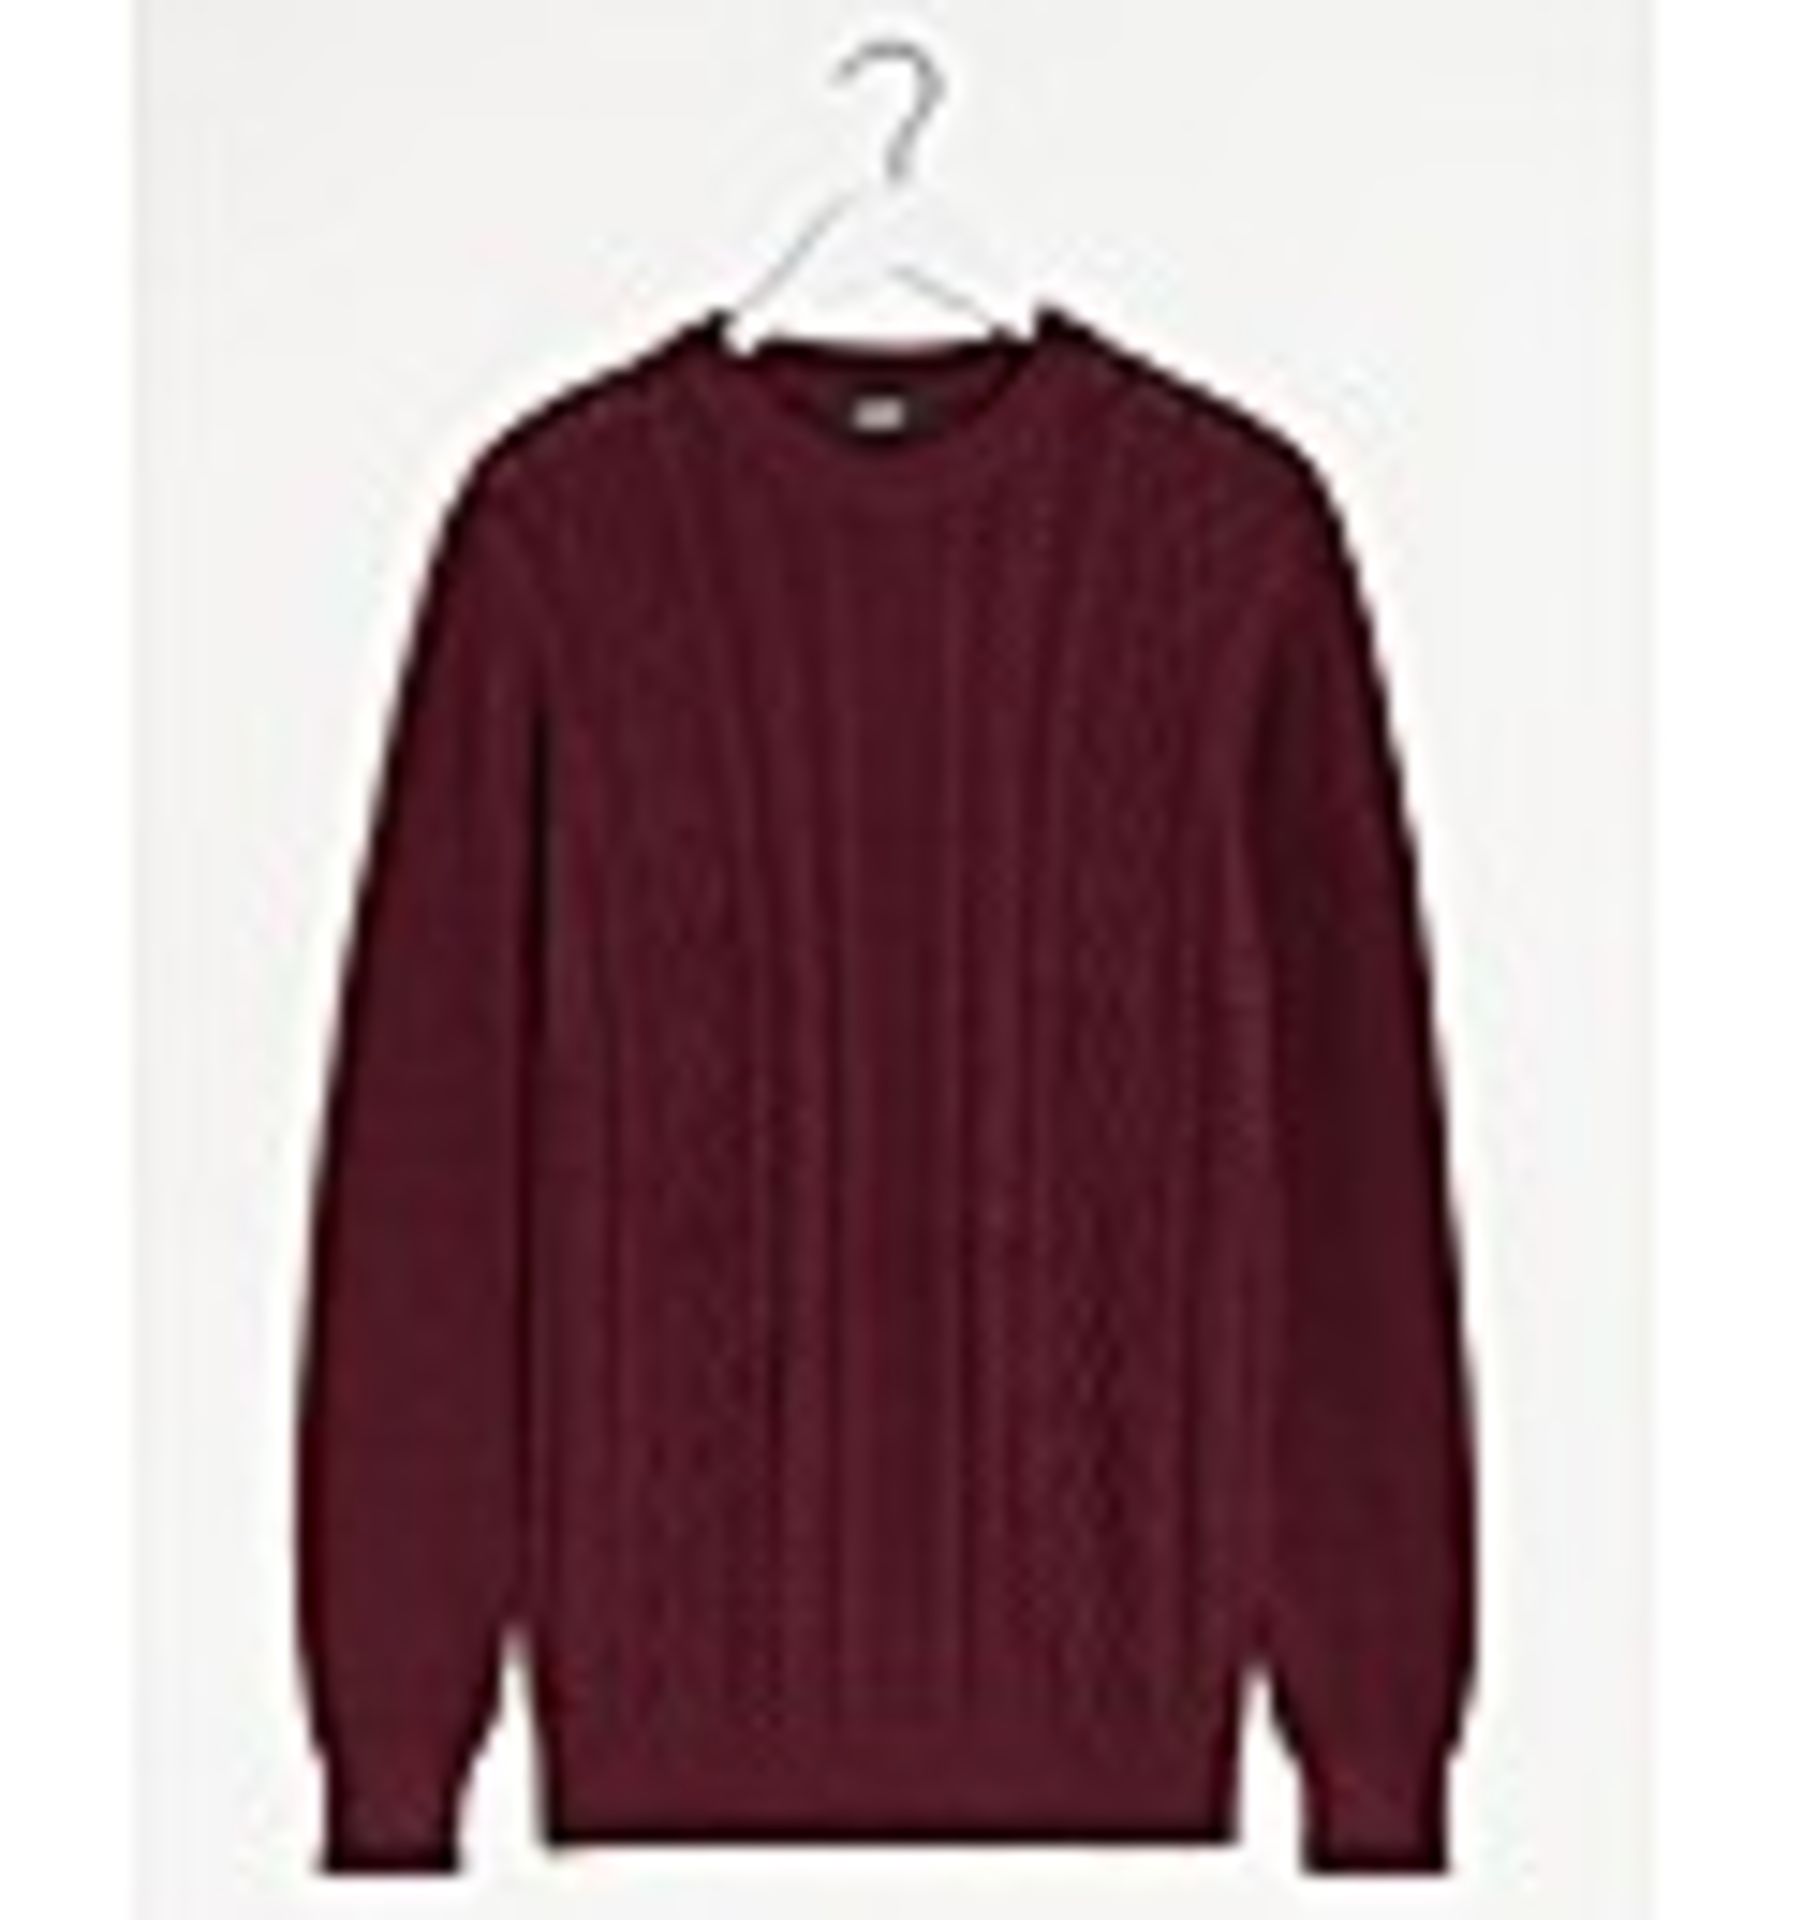 BRAND NEW WINE COLOURED CABLE KNIT JUMPER SIZE 2XLRRP £25Condition ReportBRAND NEW